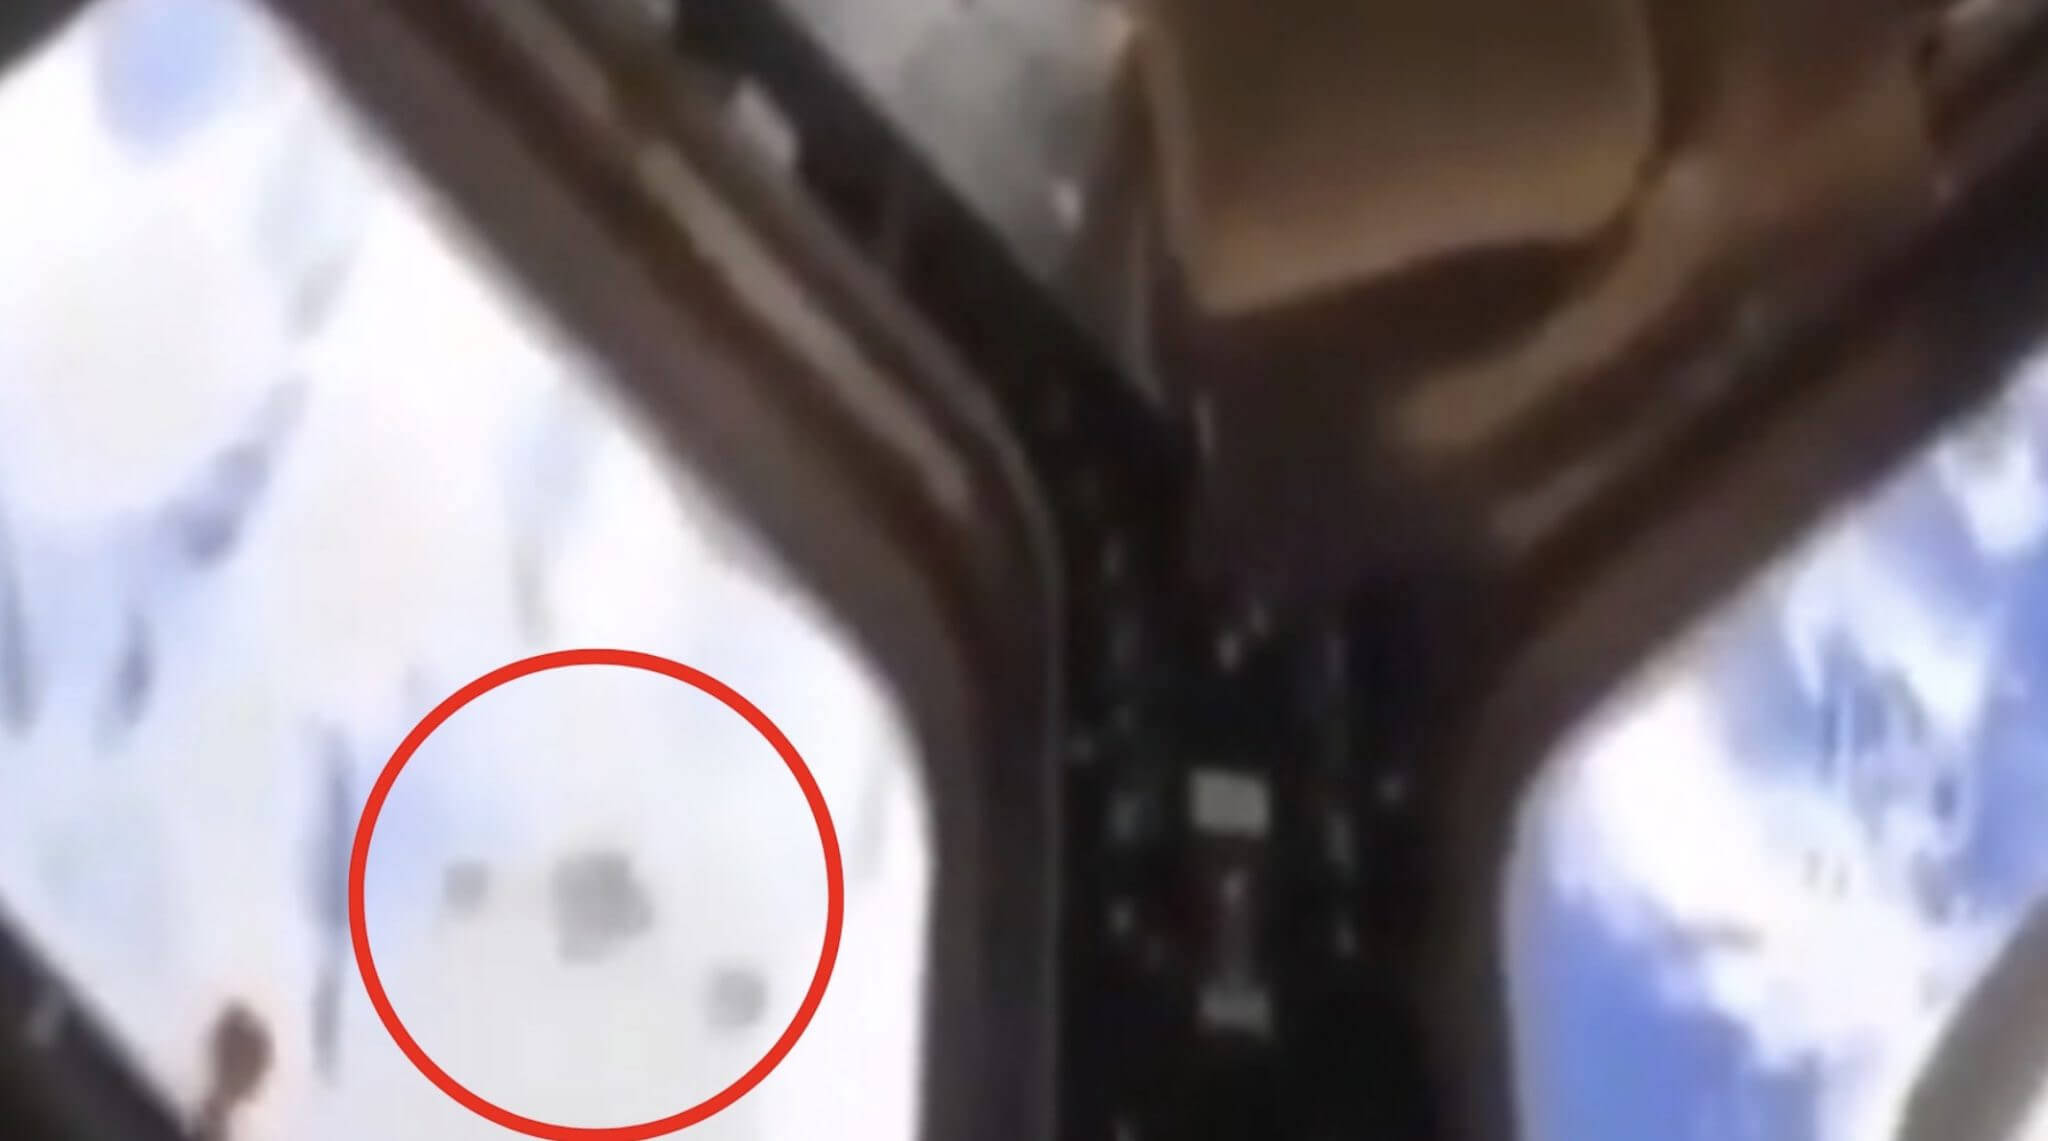 A clear photo of the UFO taken on ISS.